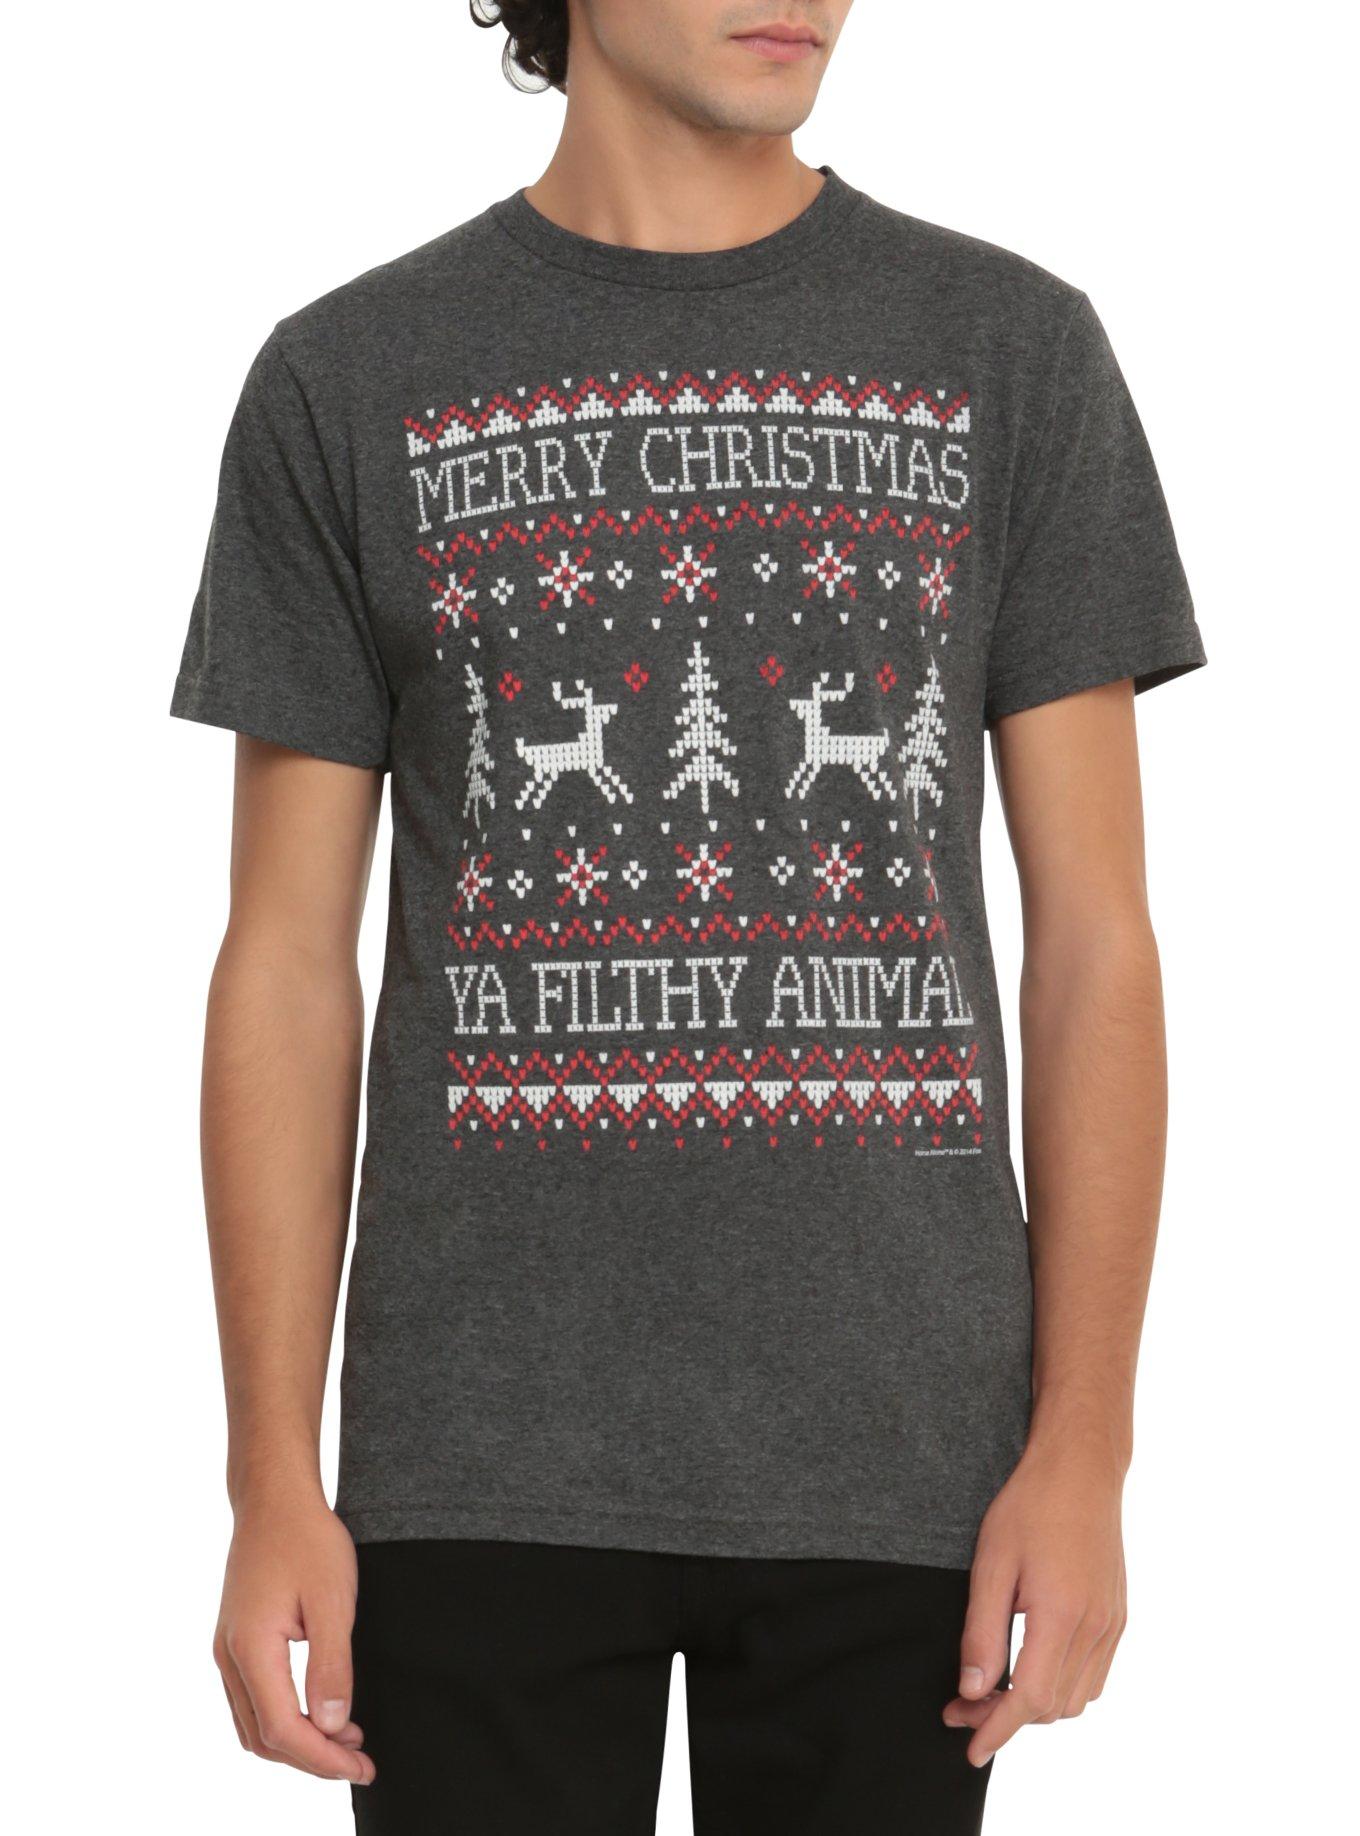 Home Alone Filthy Animal T-Shirt | Hot Topic